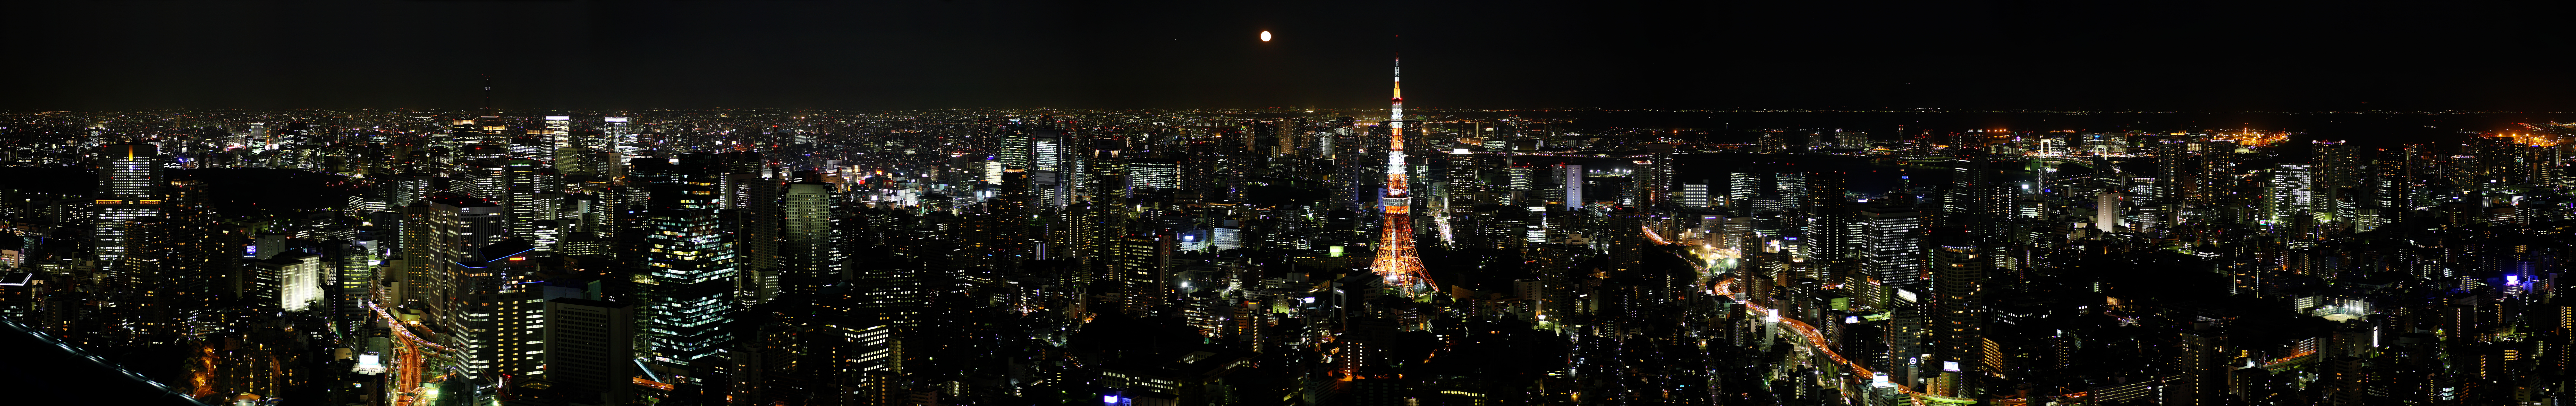 photo,material,free,landscape,picture,stock photo,Creative Commons,Tokyo panorama, Tokyo Tower, high-rise building, big city, knight view